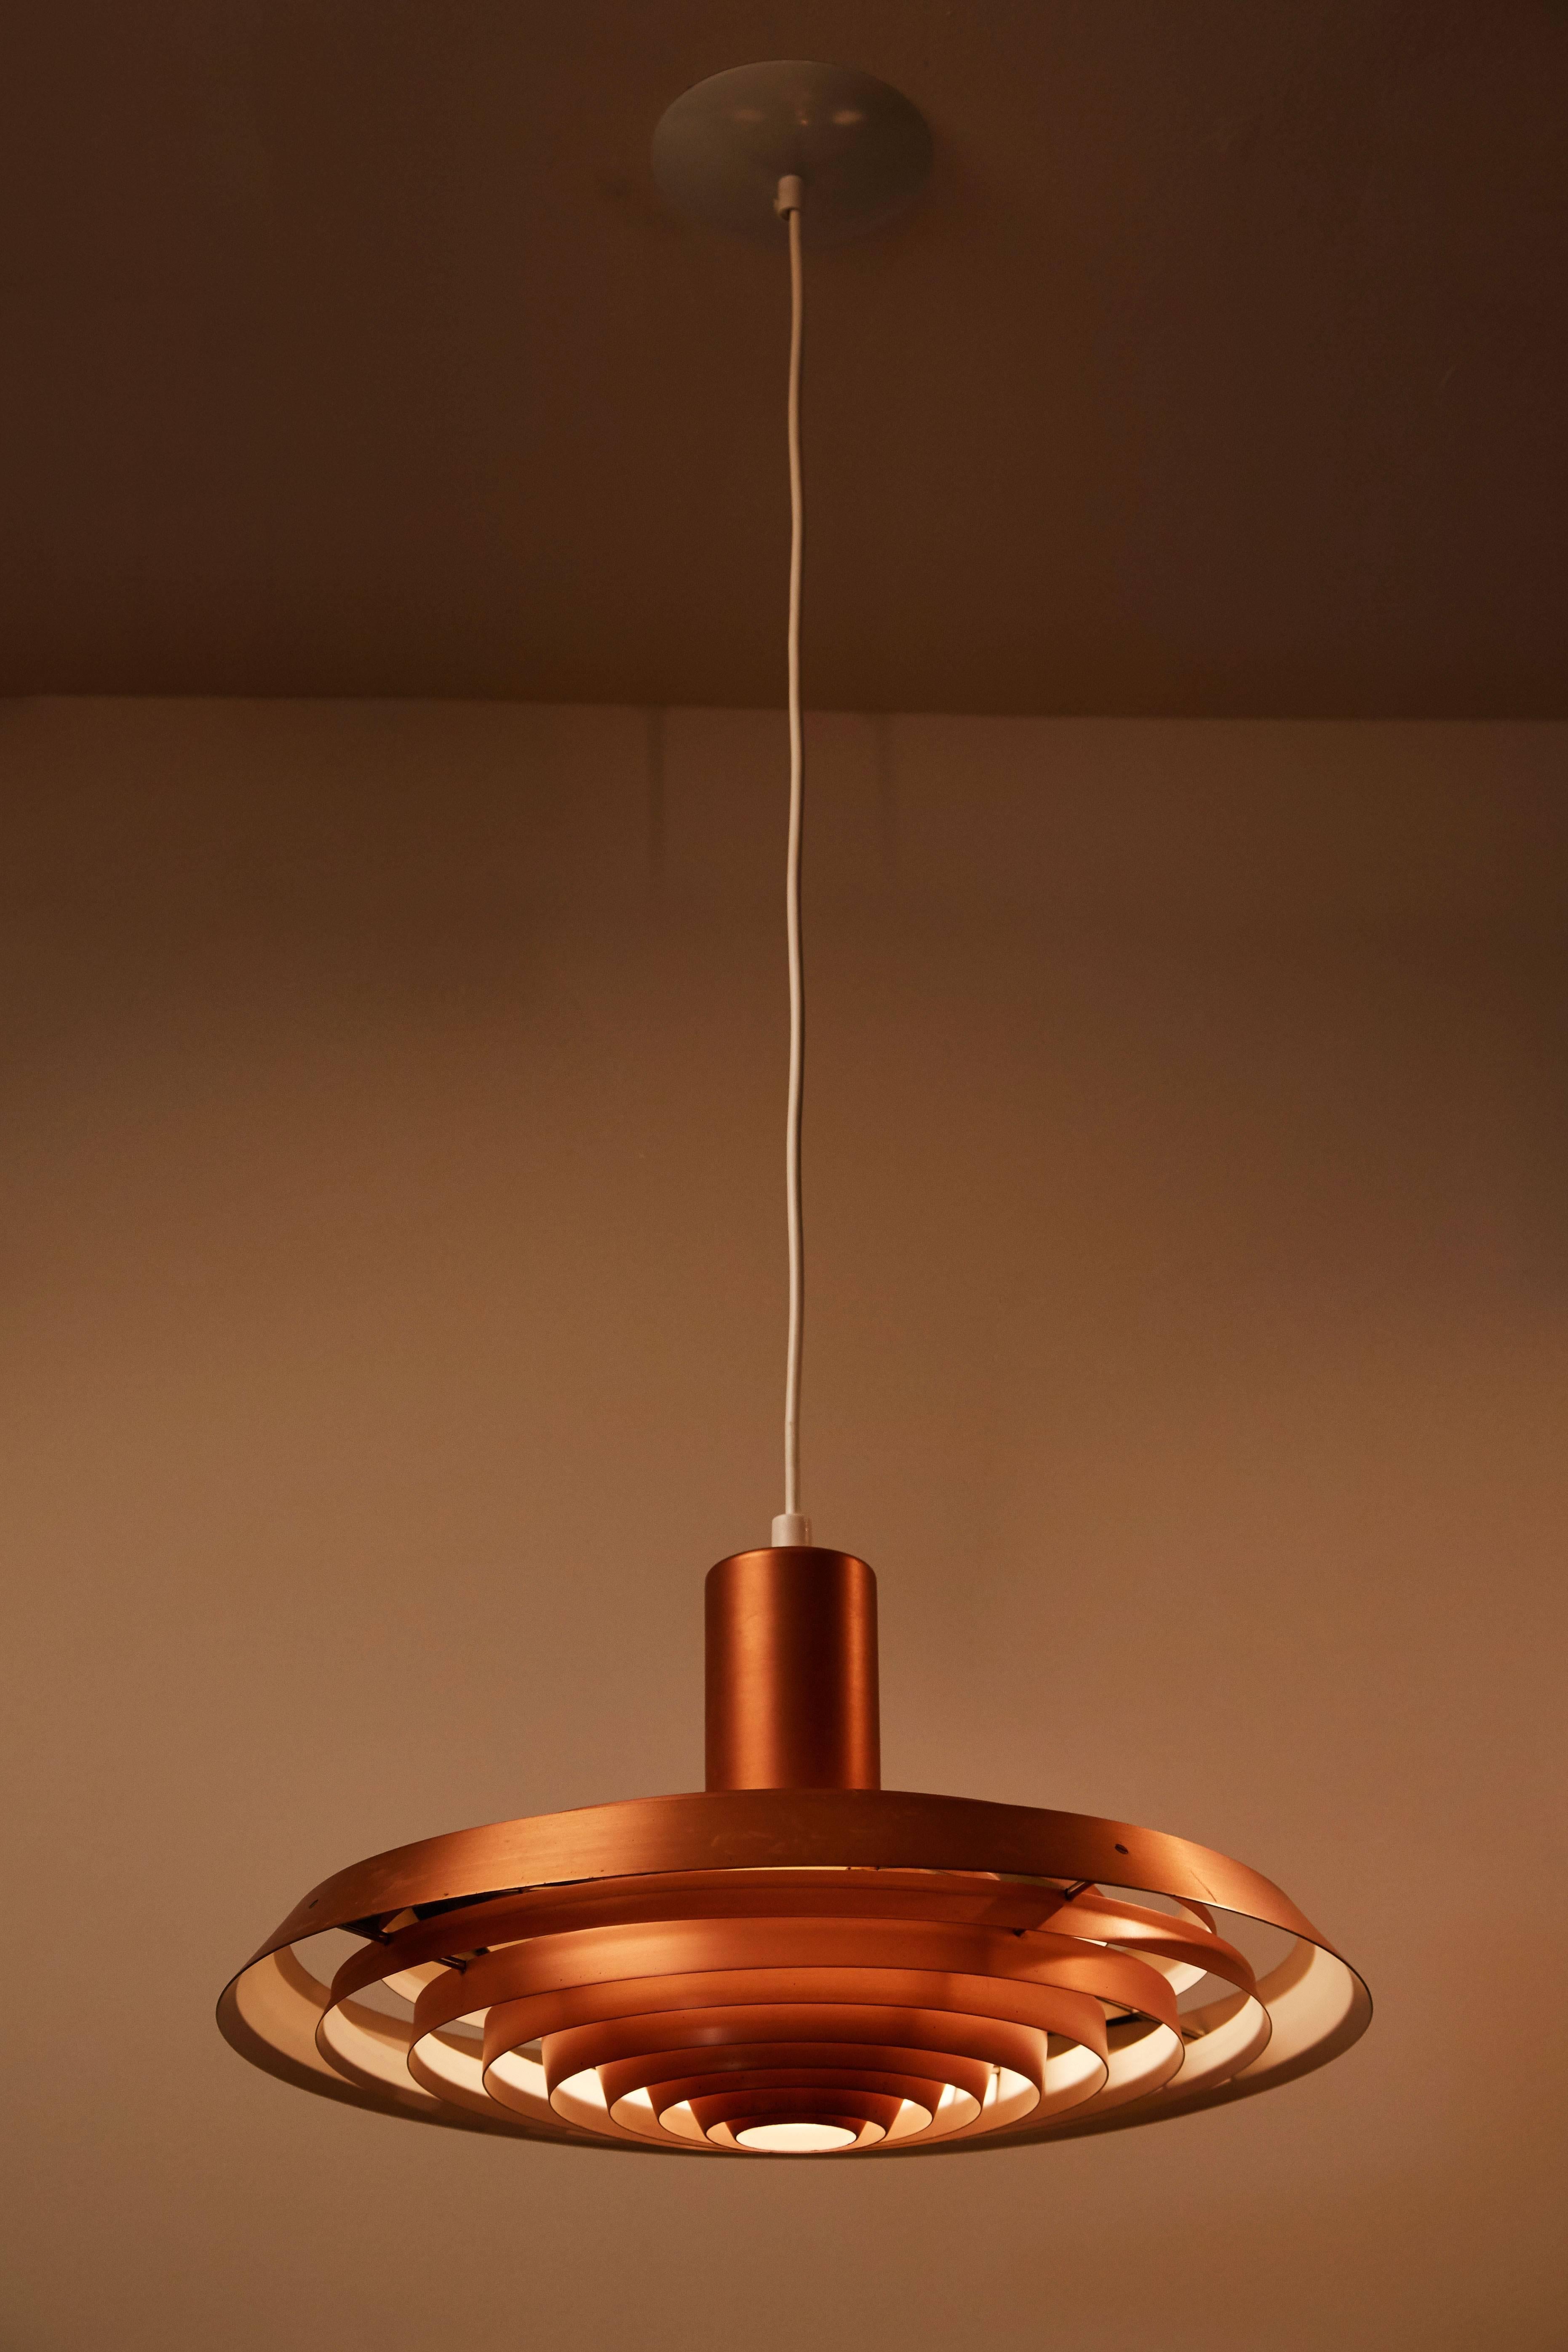 Tiered copper hanging fixture designed by Poul Henningsen for Louis Poulsen, circa 1958 for the Langelinie Pavilion in Copenhagen. Takes one E27 100w maximum bulb. Original canopy and cord. Wired for US junction boxes. Two available, priced